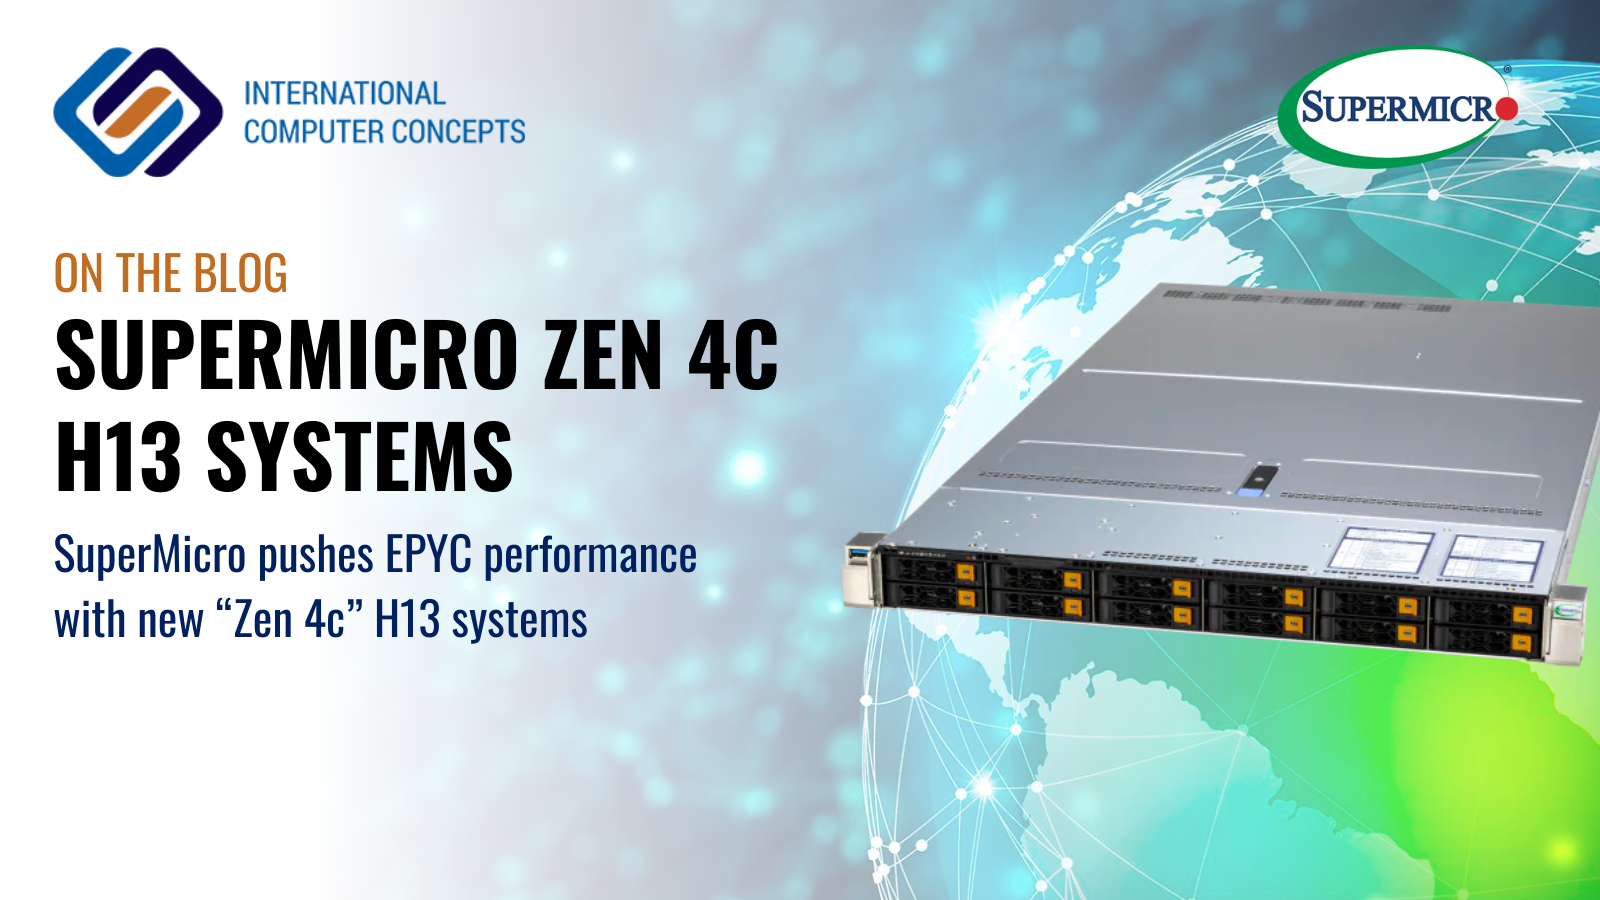 SuperMicro pushes EPYC performance with new “Zen 4c” H13 systems